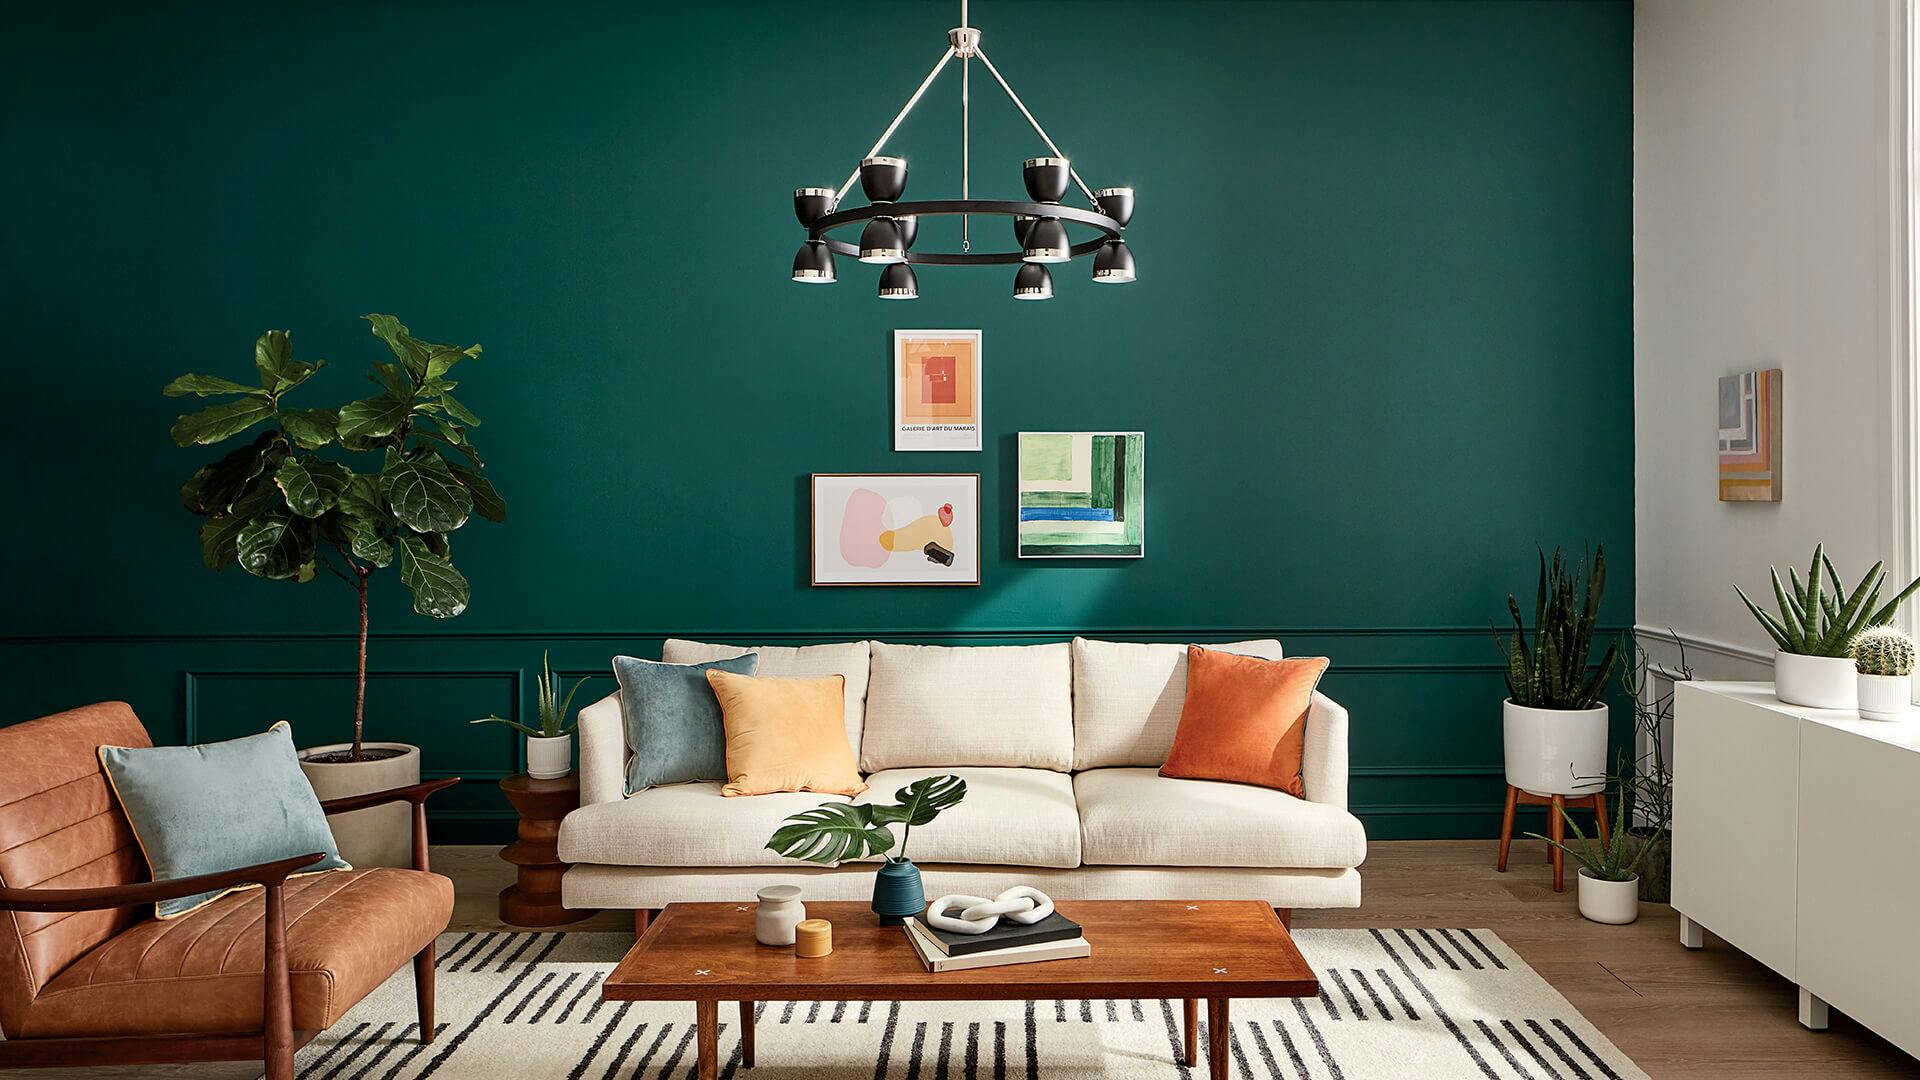 Contemporary living room with dark green wall and southwest color palette furnishing featuring a Baland chandelier